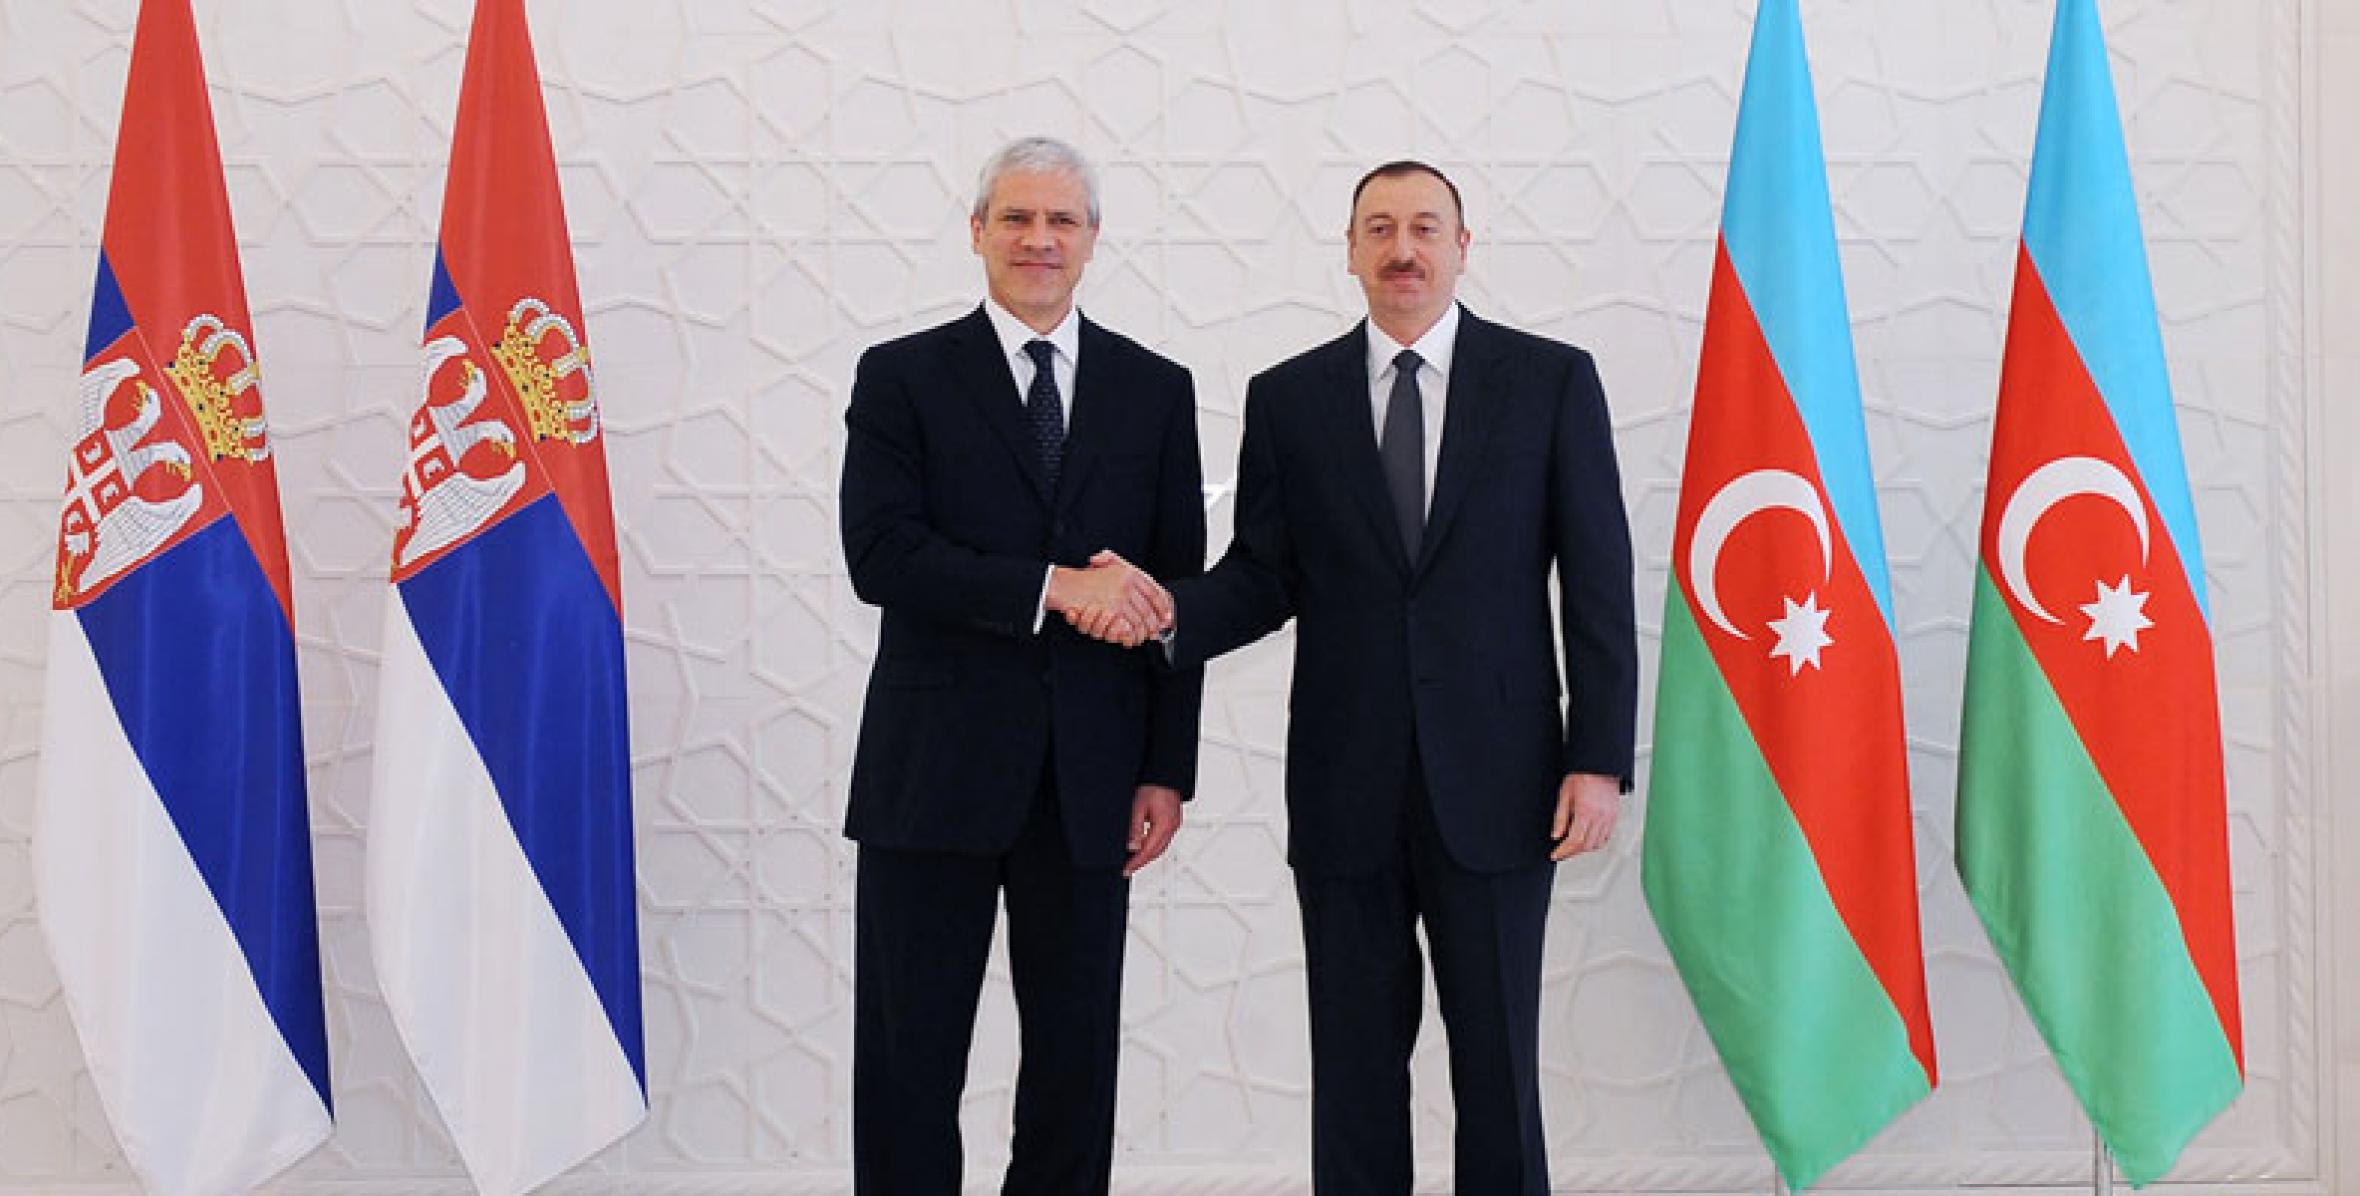 Ilham Aliyev held a meeting in private with Serbian President Boris Tadic